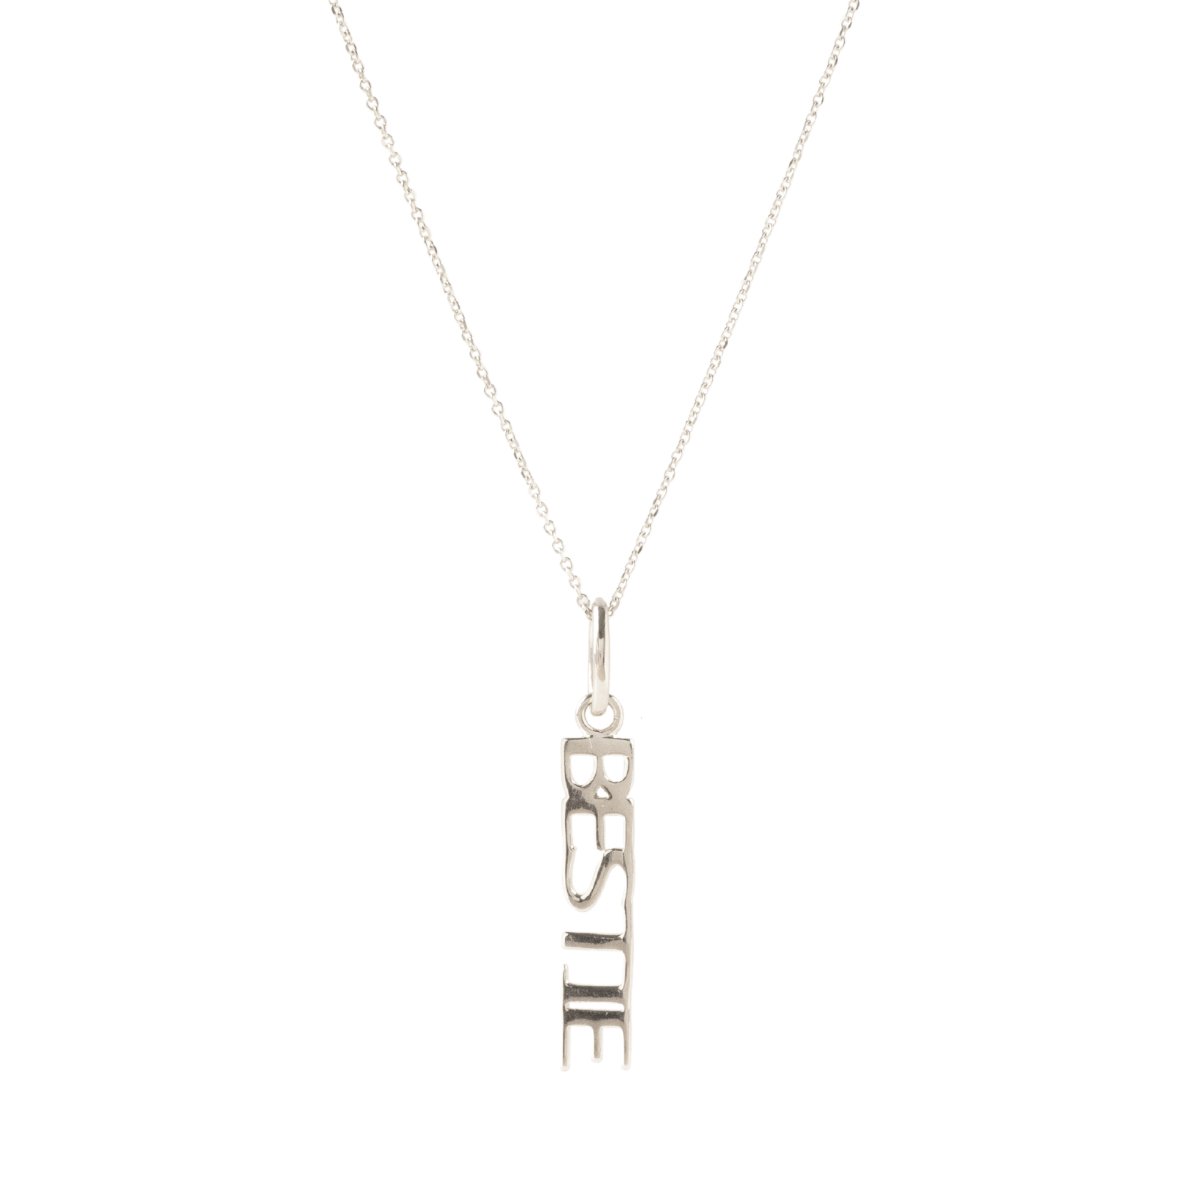 BESTIE FEARLESS NAMESAKE NECKLACE - SILVER - SO PRETTY CARA COTTER